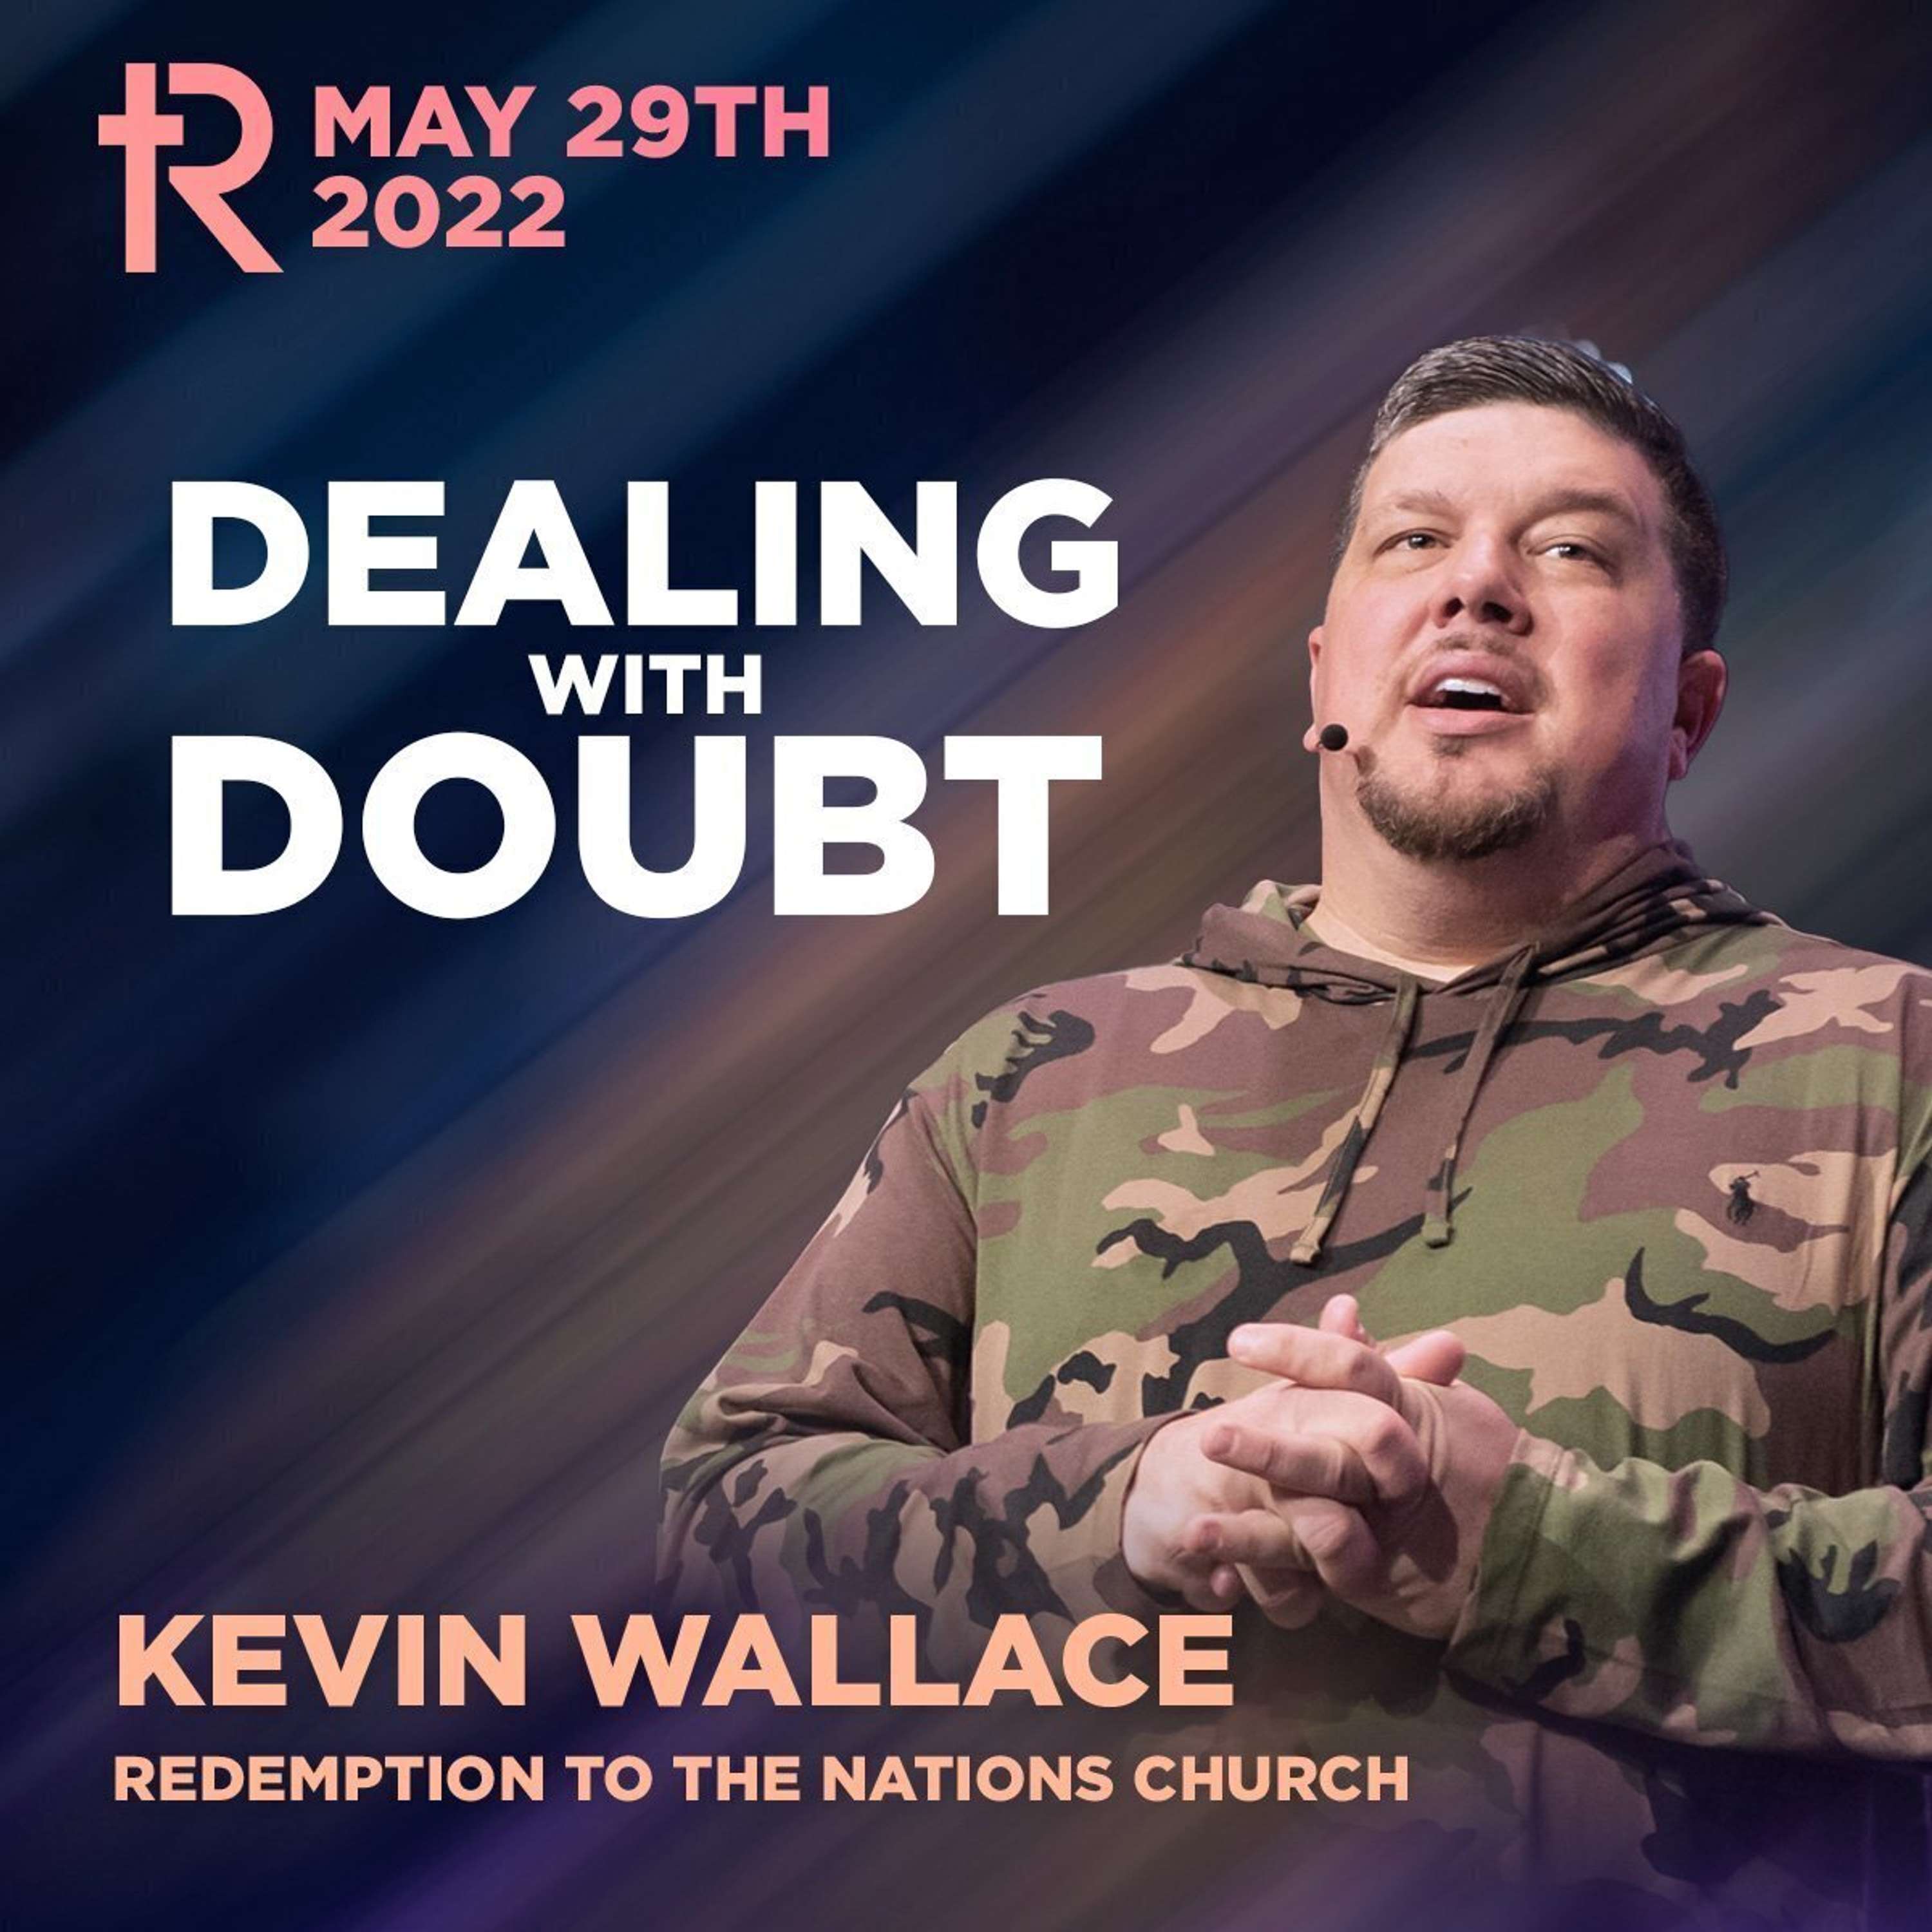 Dealing With Doubt | Kevin Wallace | Weekend Service